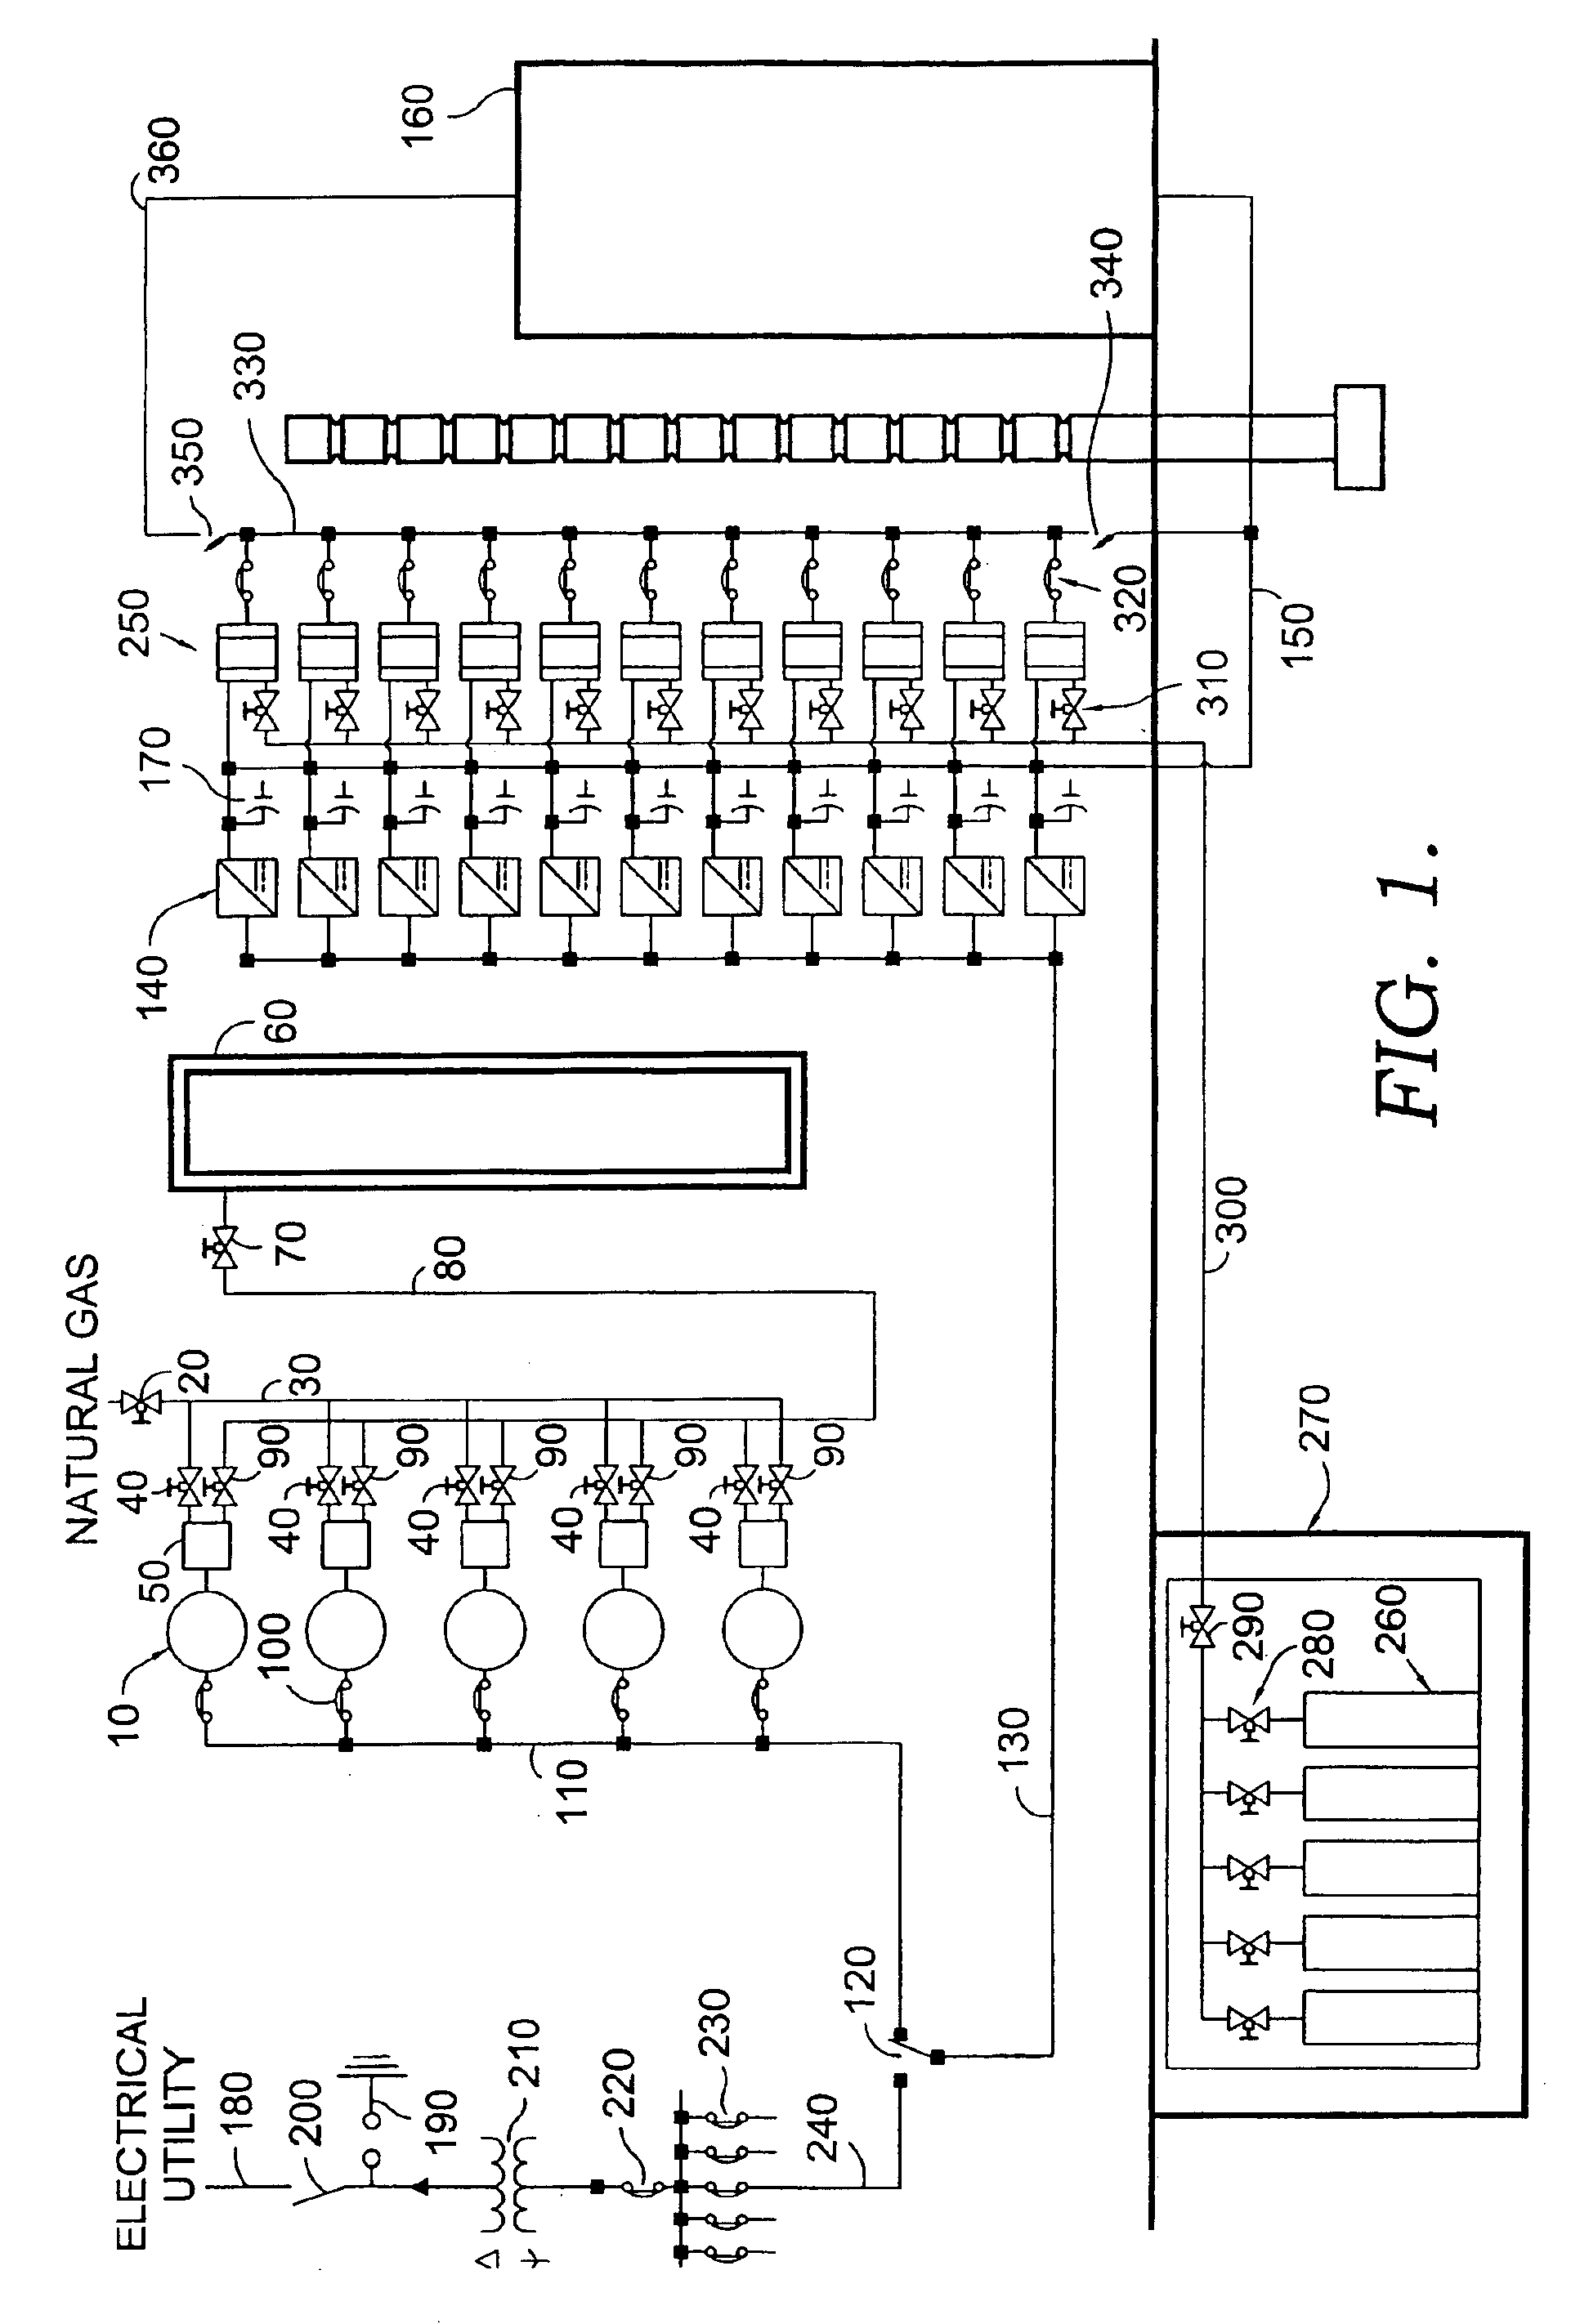 Power system for a telecommunication facility